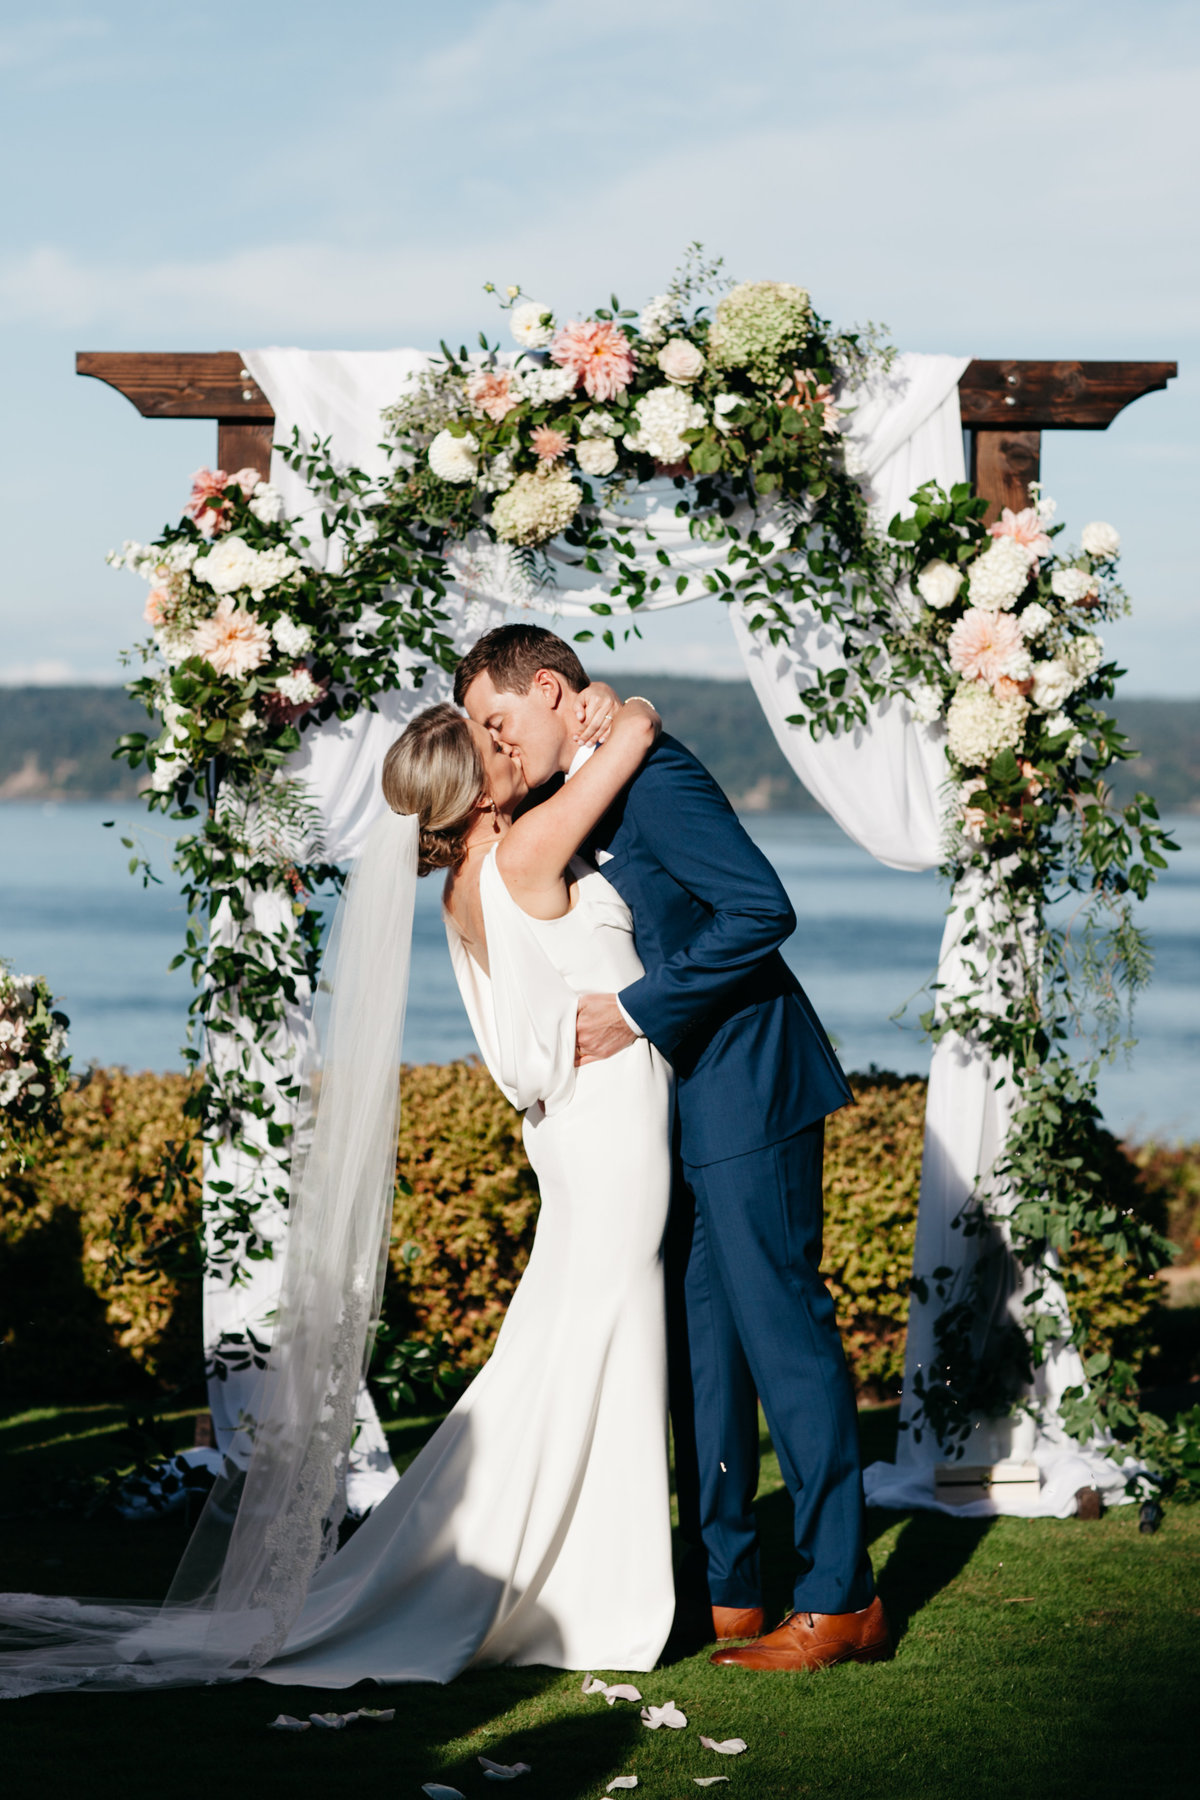 Wedding ceremony arch draped in white with blush flowers and smilax vines.